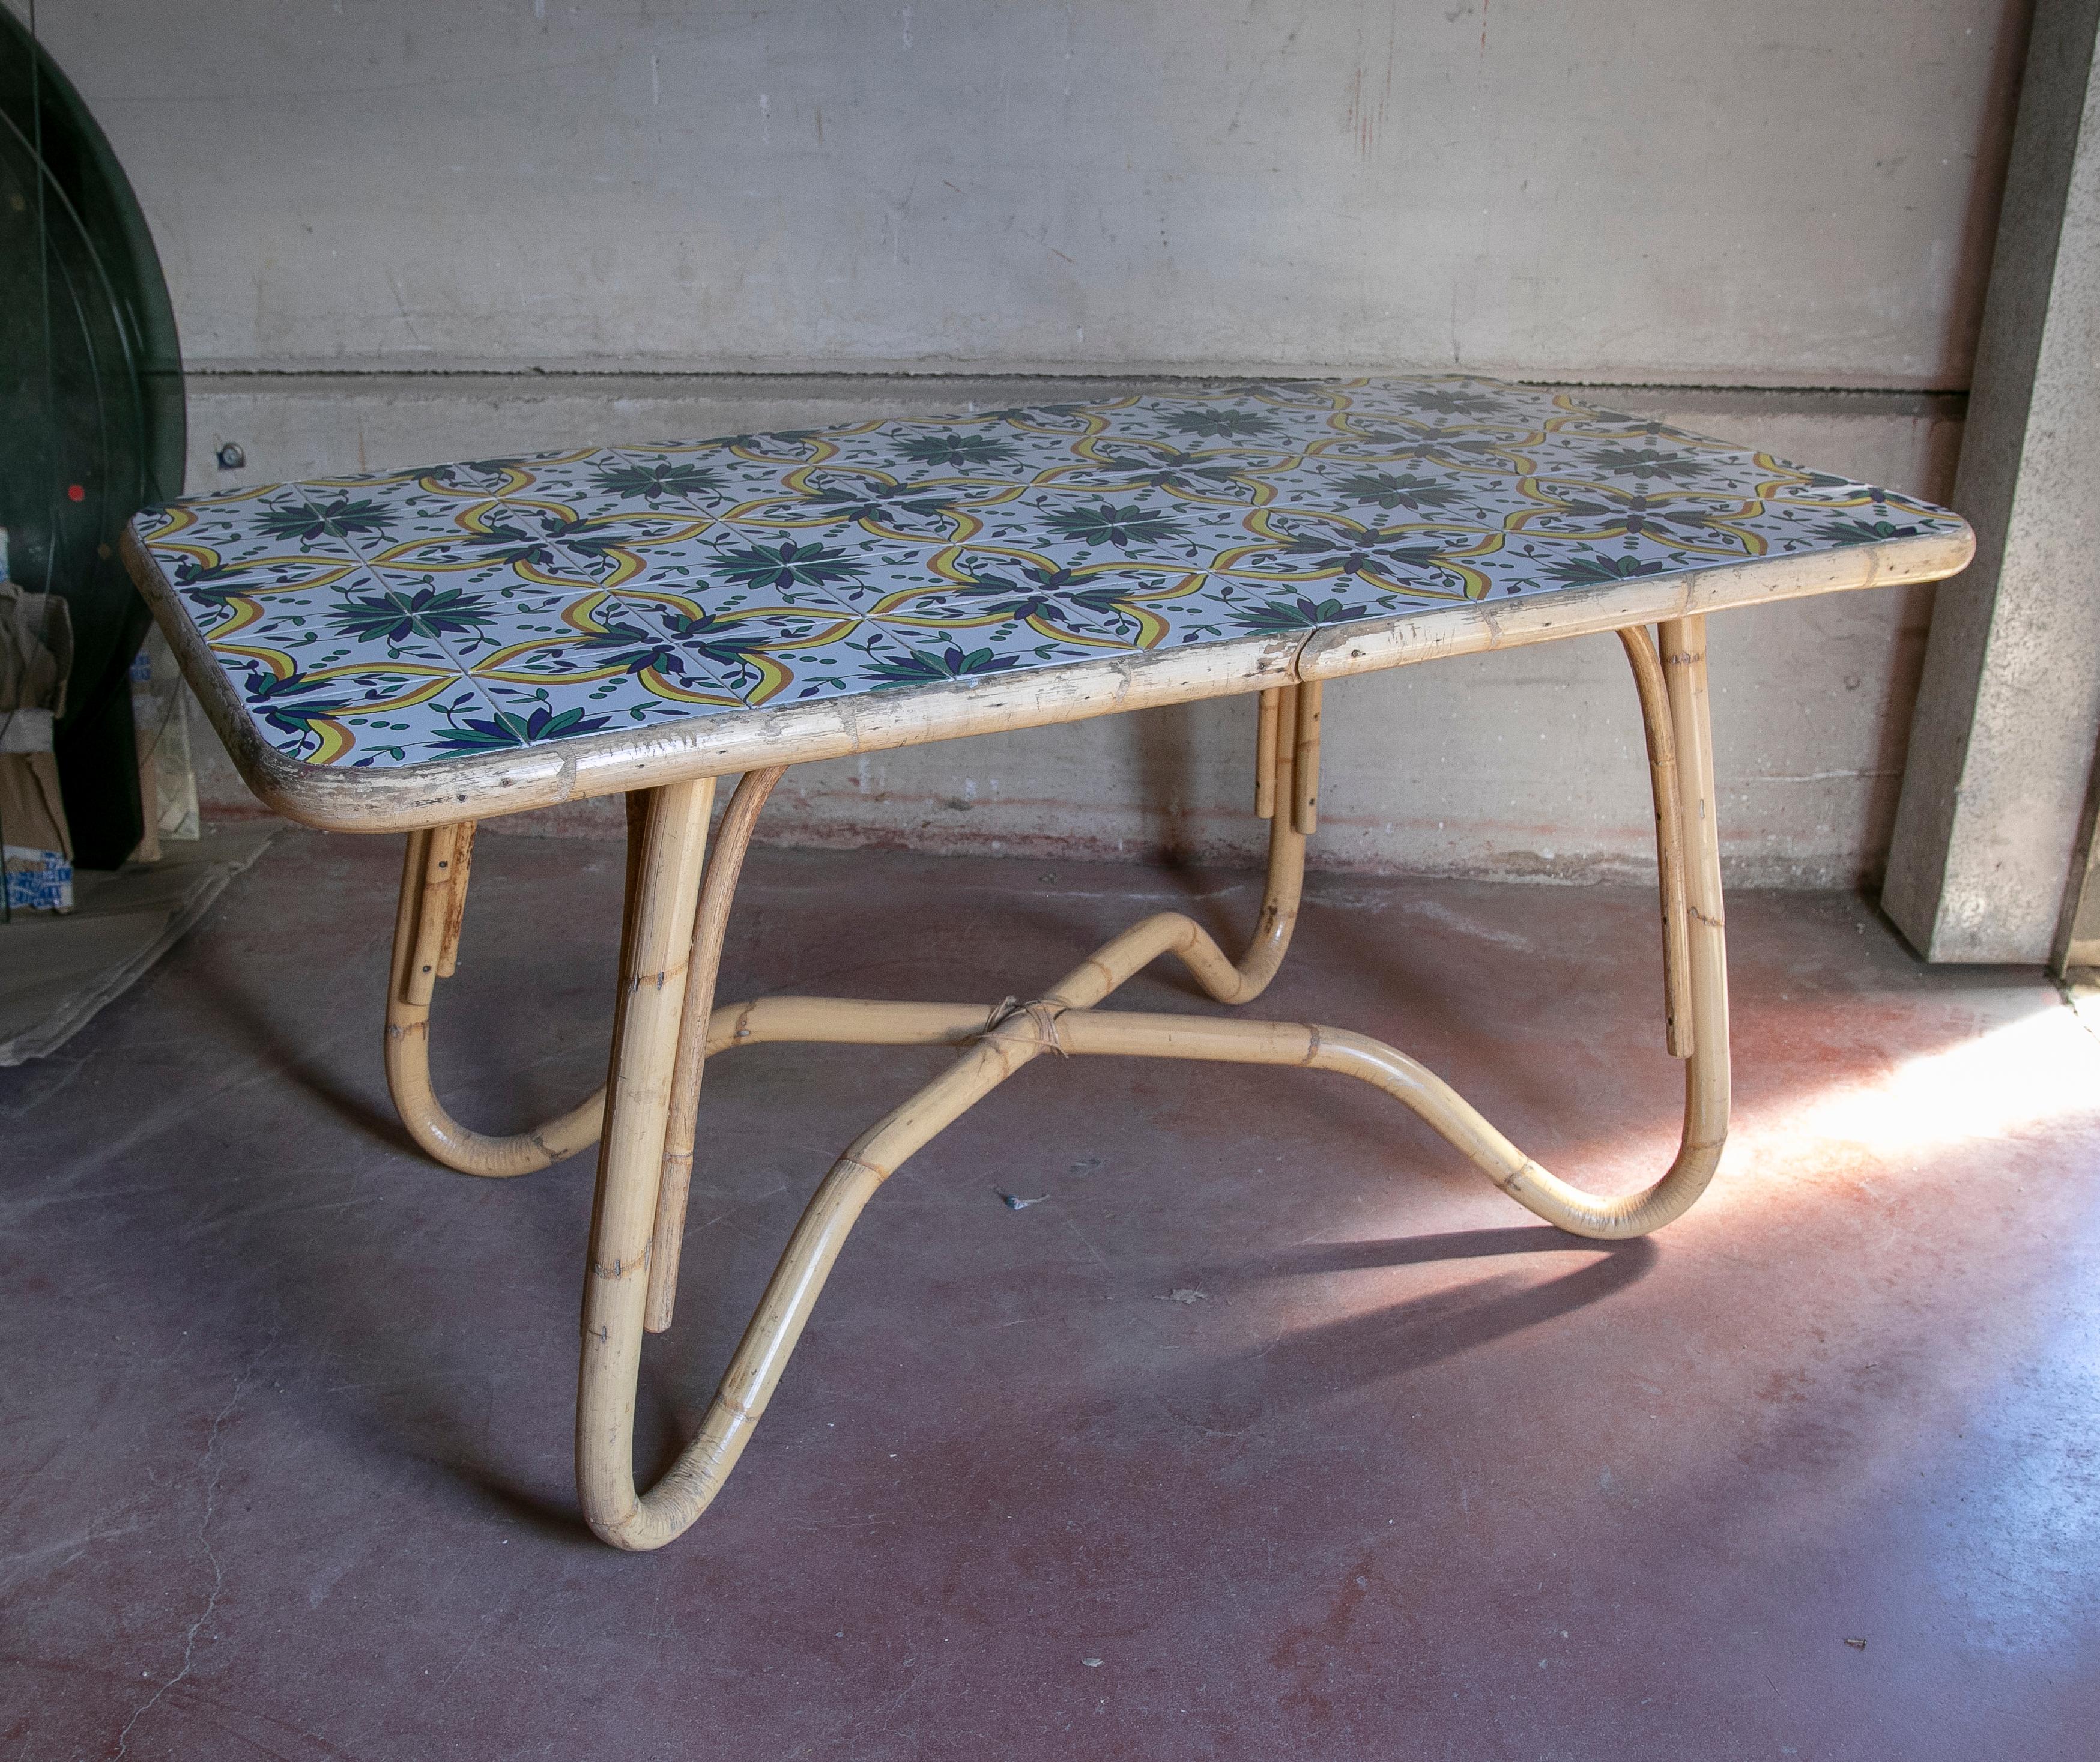 1970s Bamboo Table with Tiled Ceramic Cover.